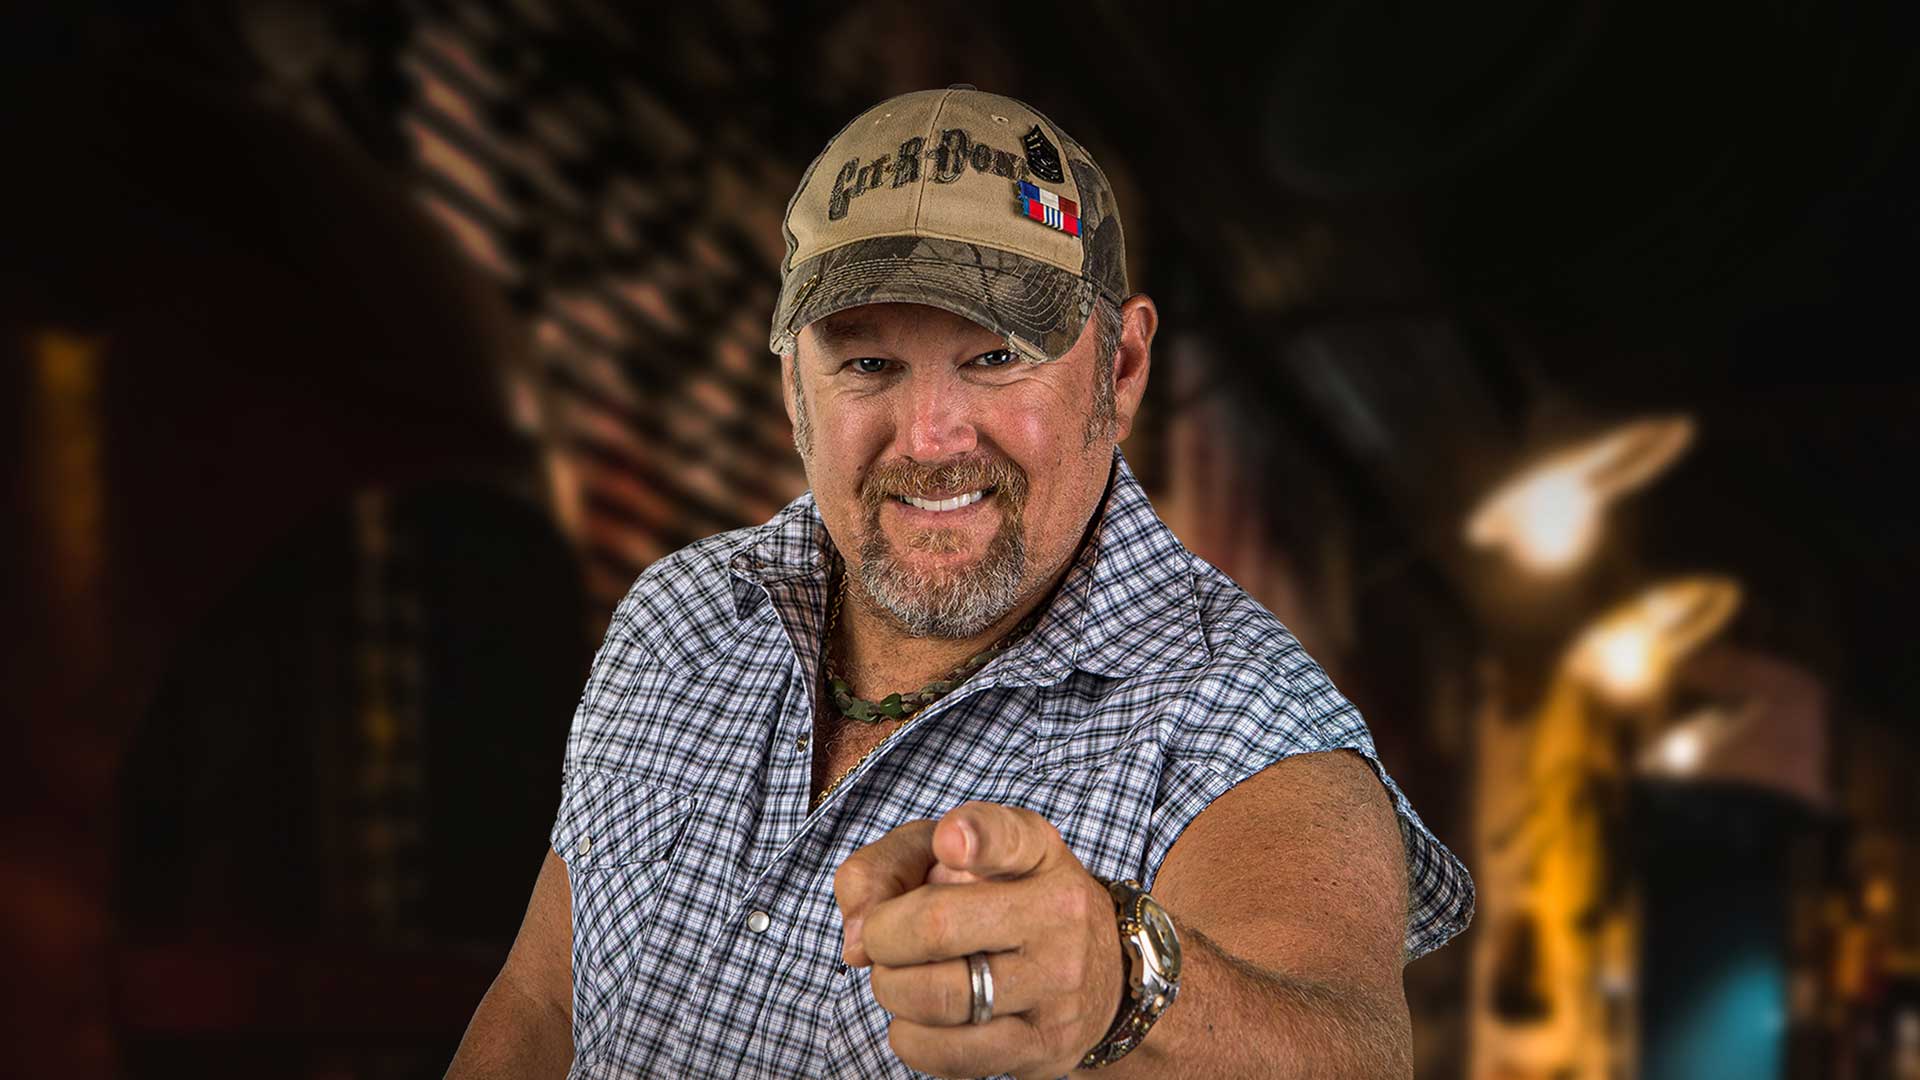 Larry the Cable Guy to 'Git-R-Done' with Weidner Center show Nov. 30